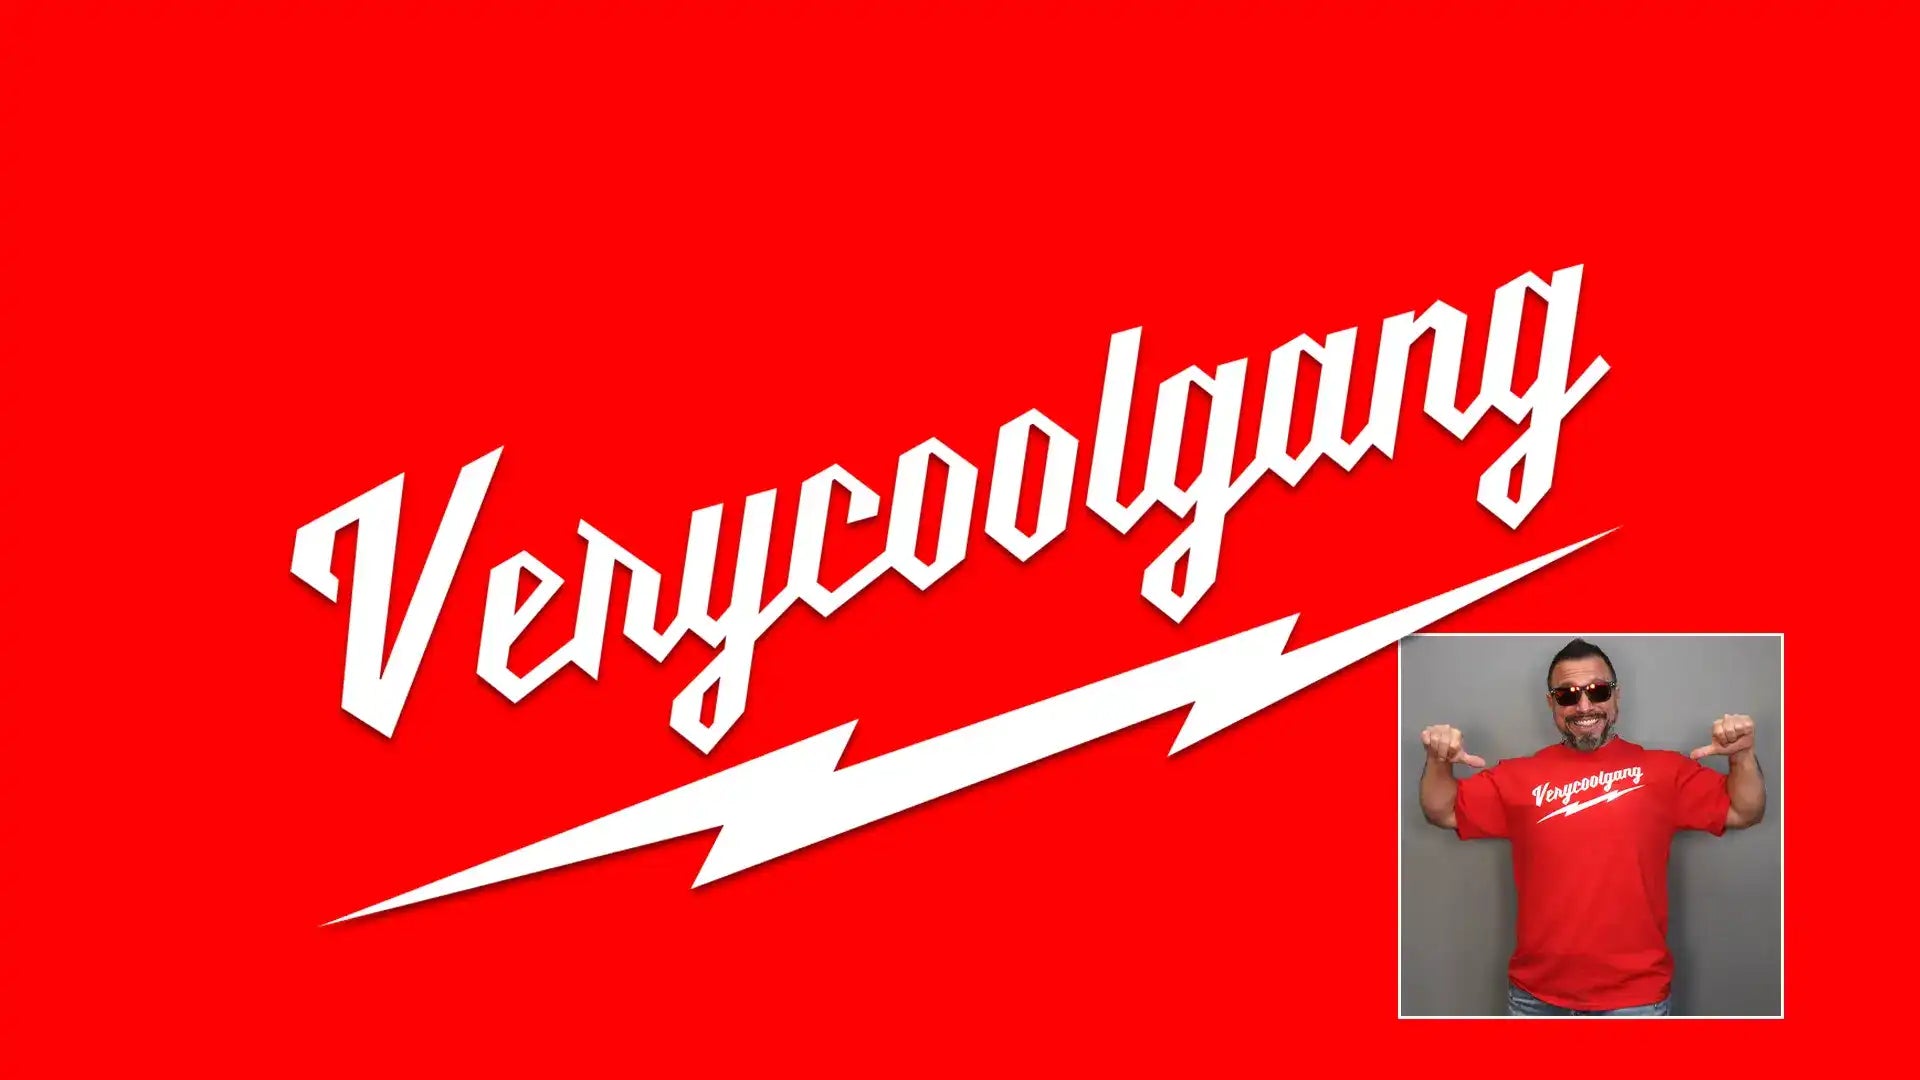 Red Background white VeryCoolGang stylized Logo Vince wearing Red Shirt pointing at logo with thumbs